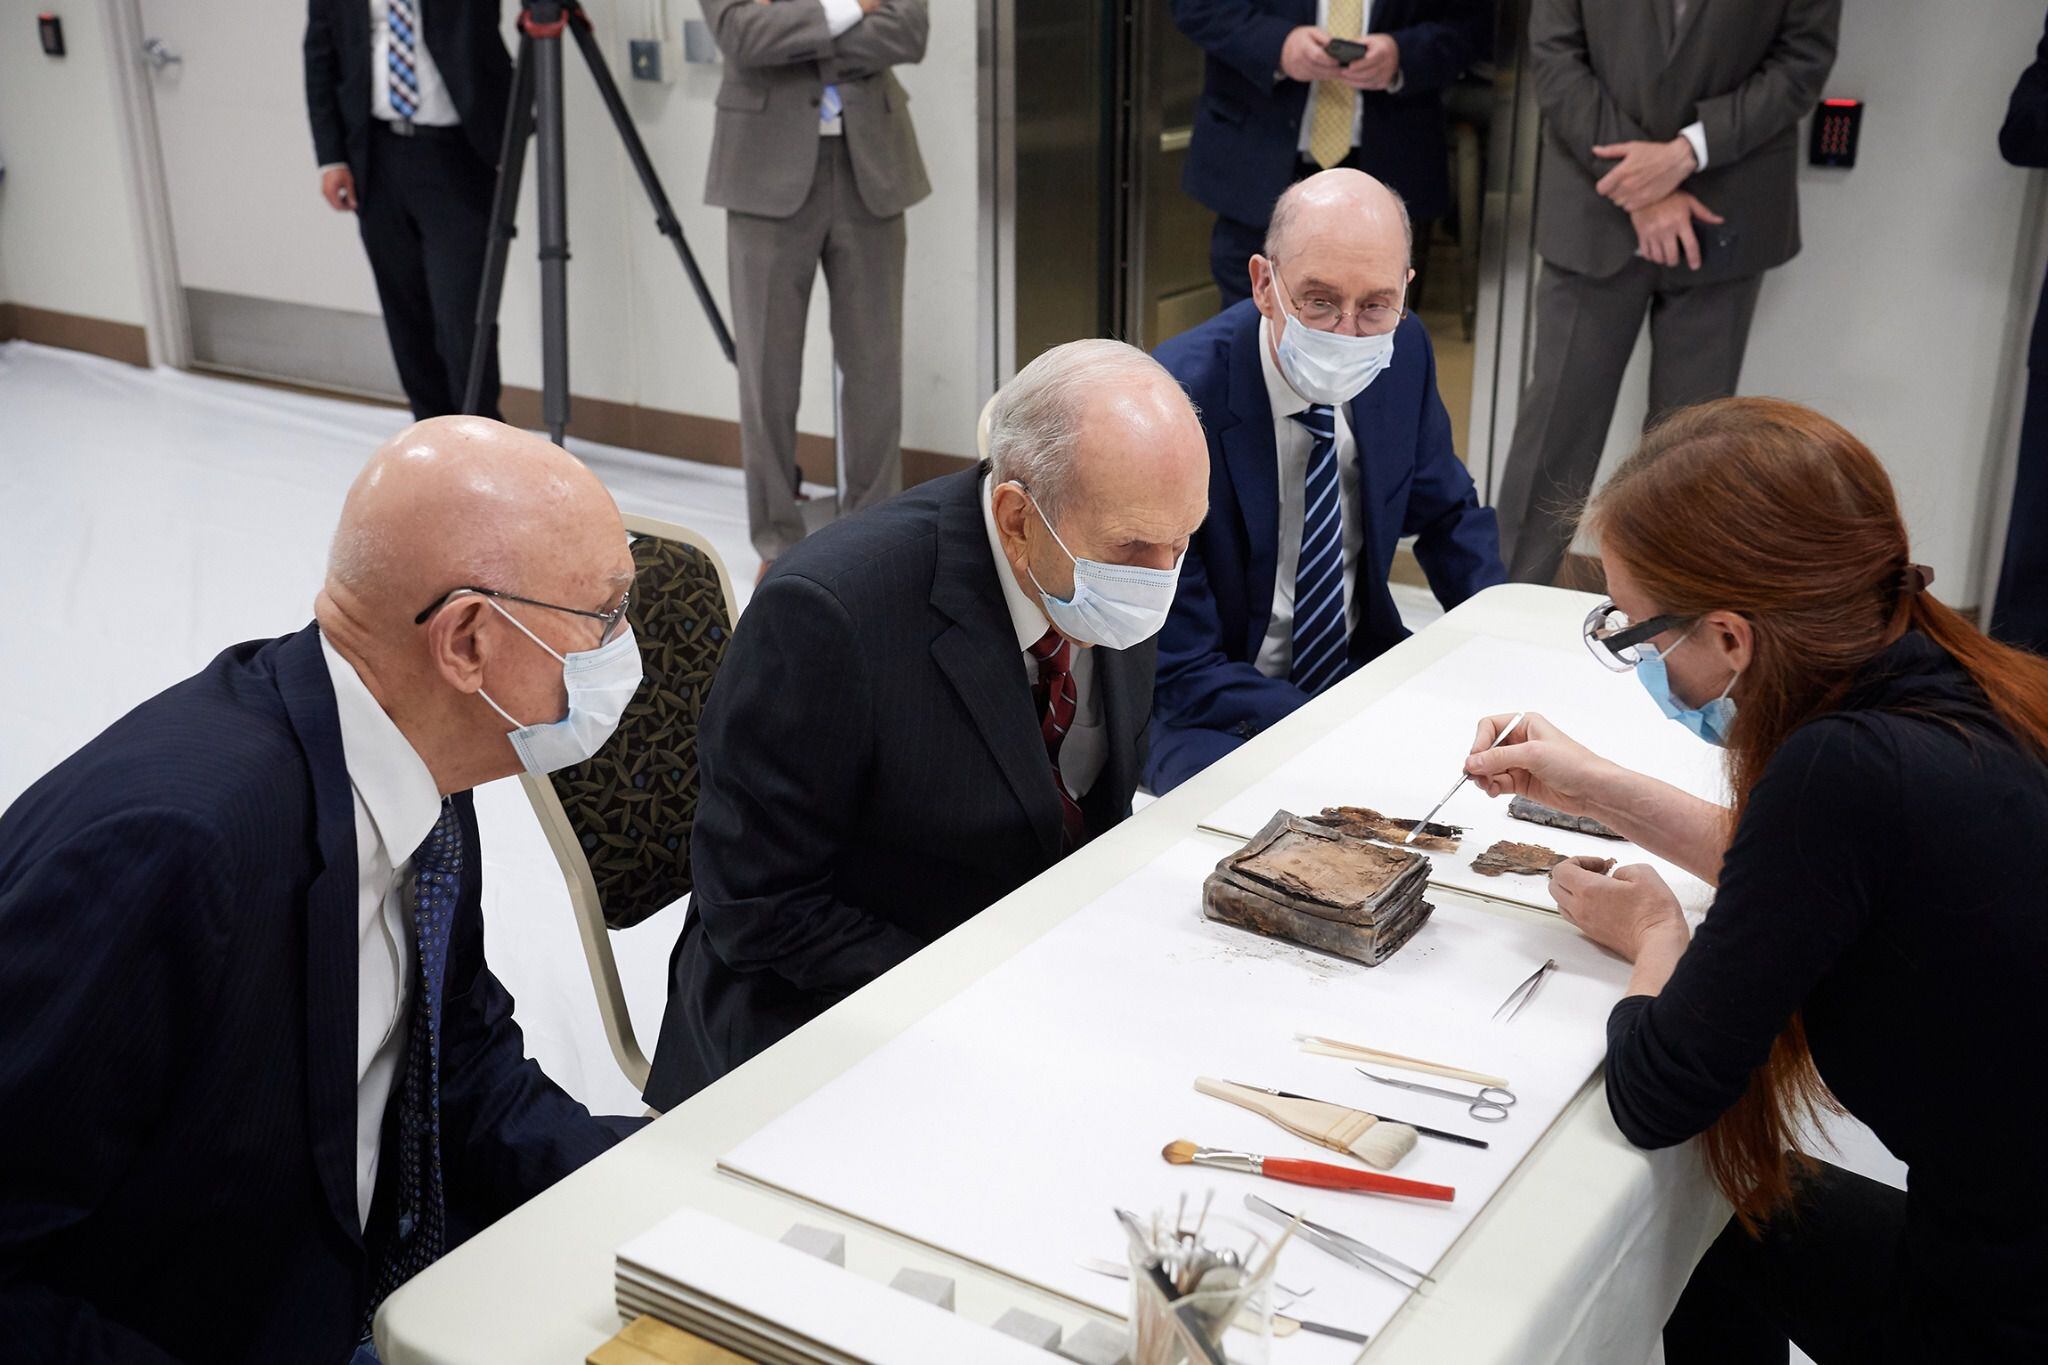 (photo courtesy The Church of Jesus Christ of Latter-day Saints) Emiline Twitchell, a conservator at the Church History Library, shows contents from the capstone of the Salt Lake Temple to the First Presidency on May 20, 2020.